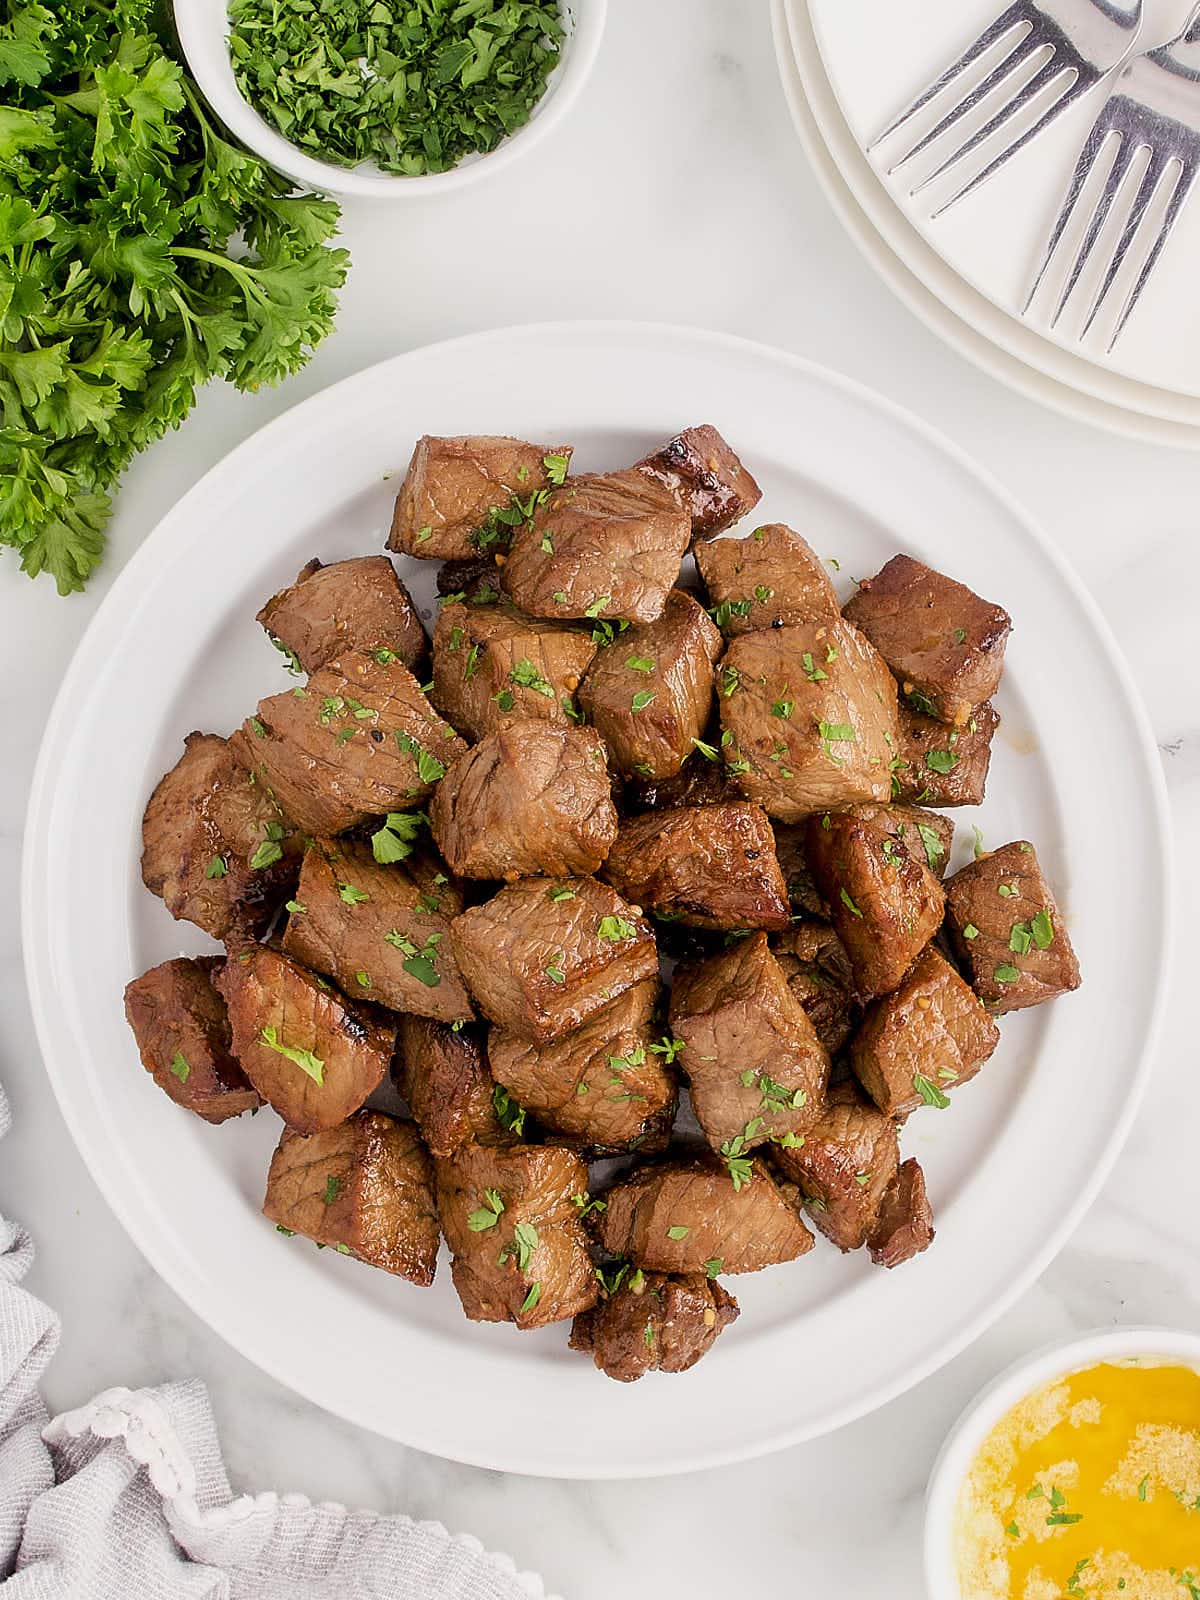 Top-down view of a plate of steak bites.